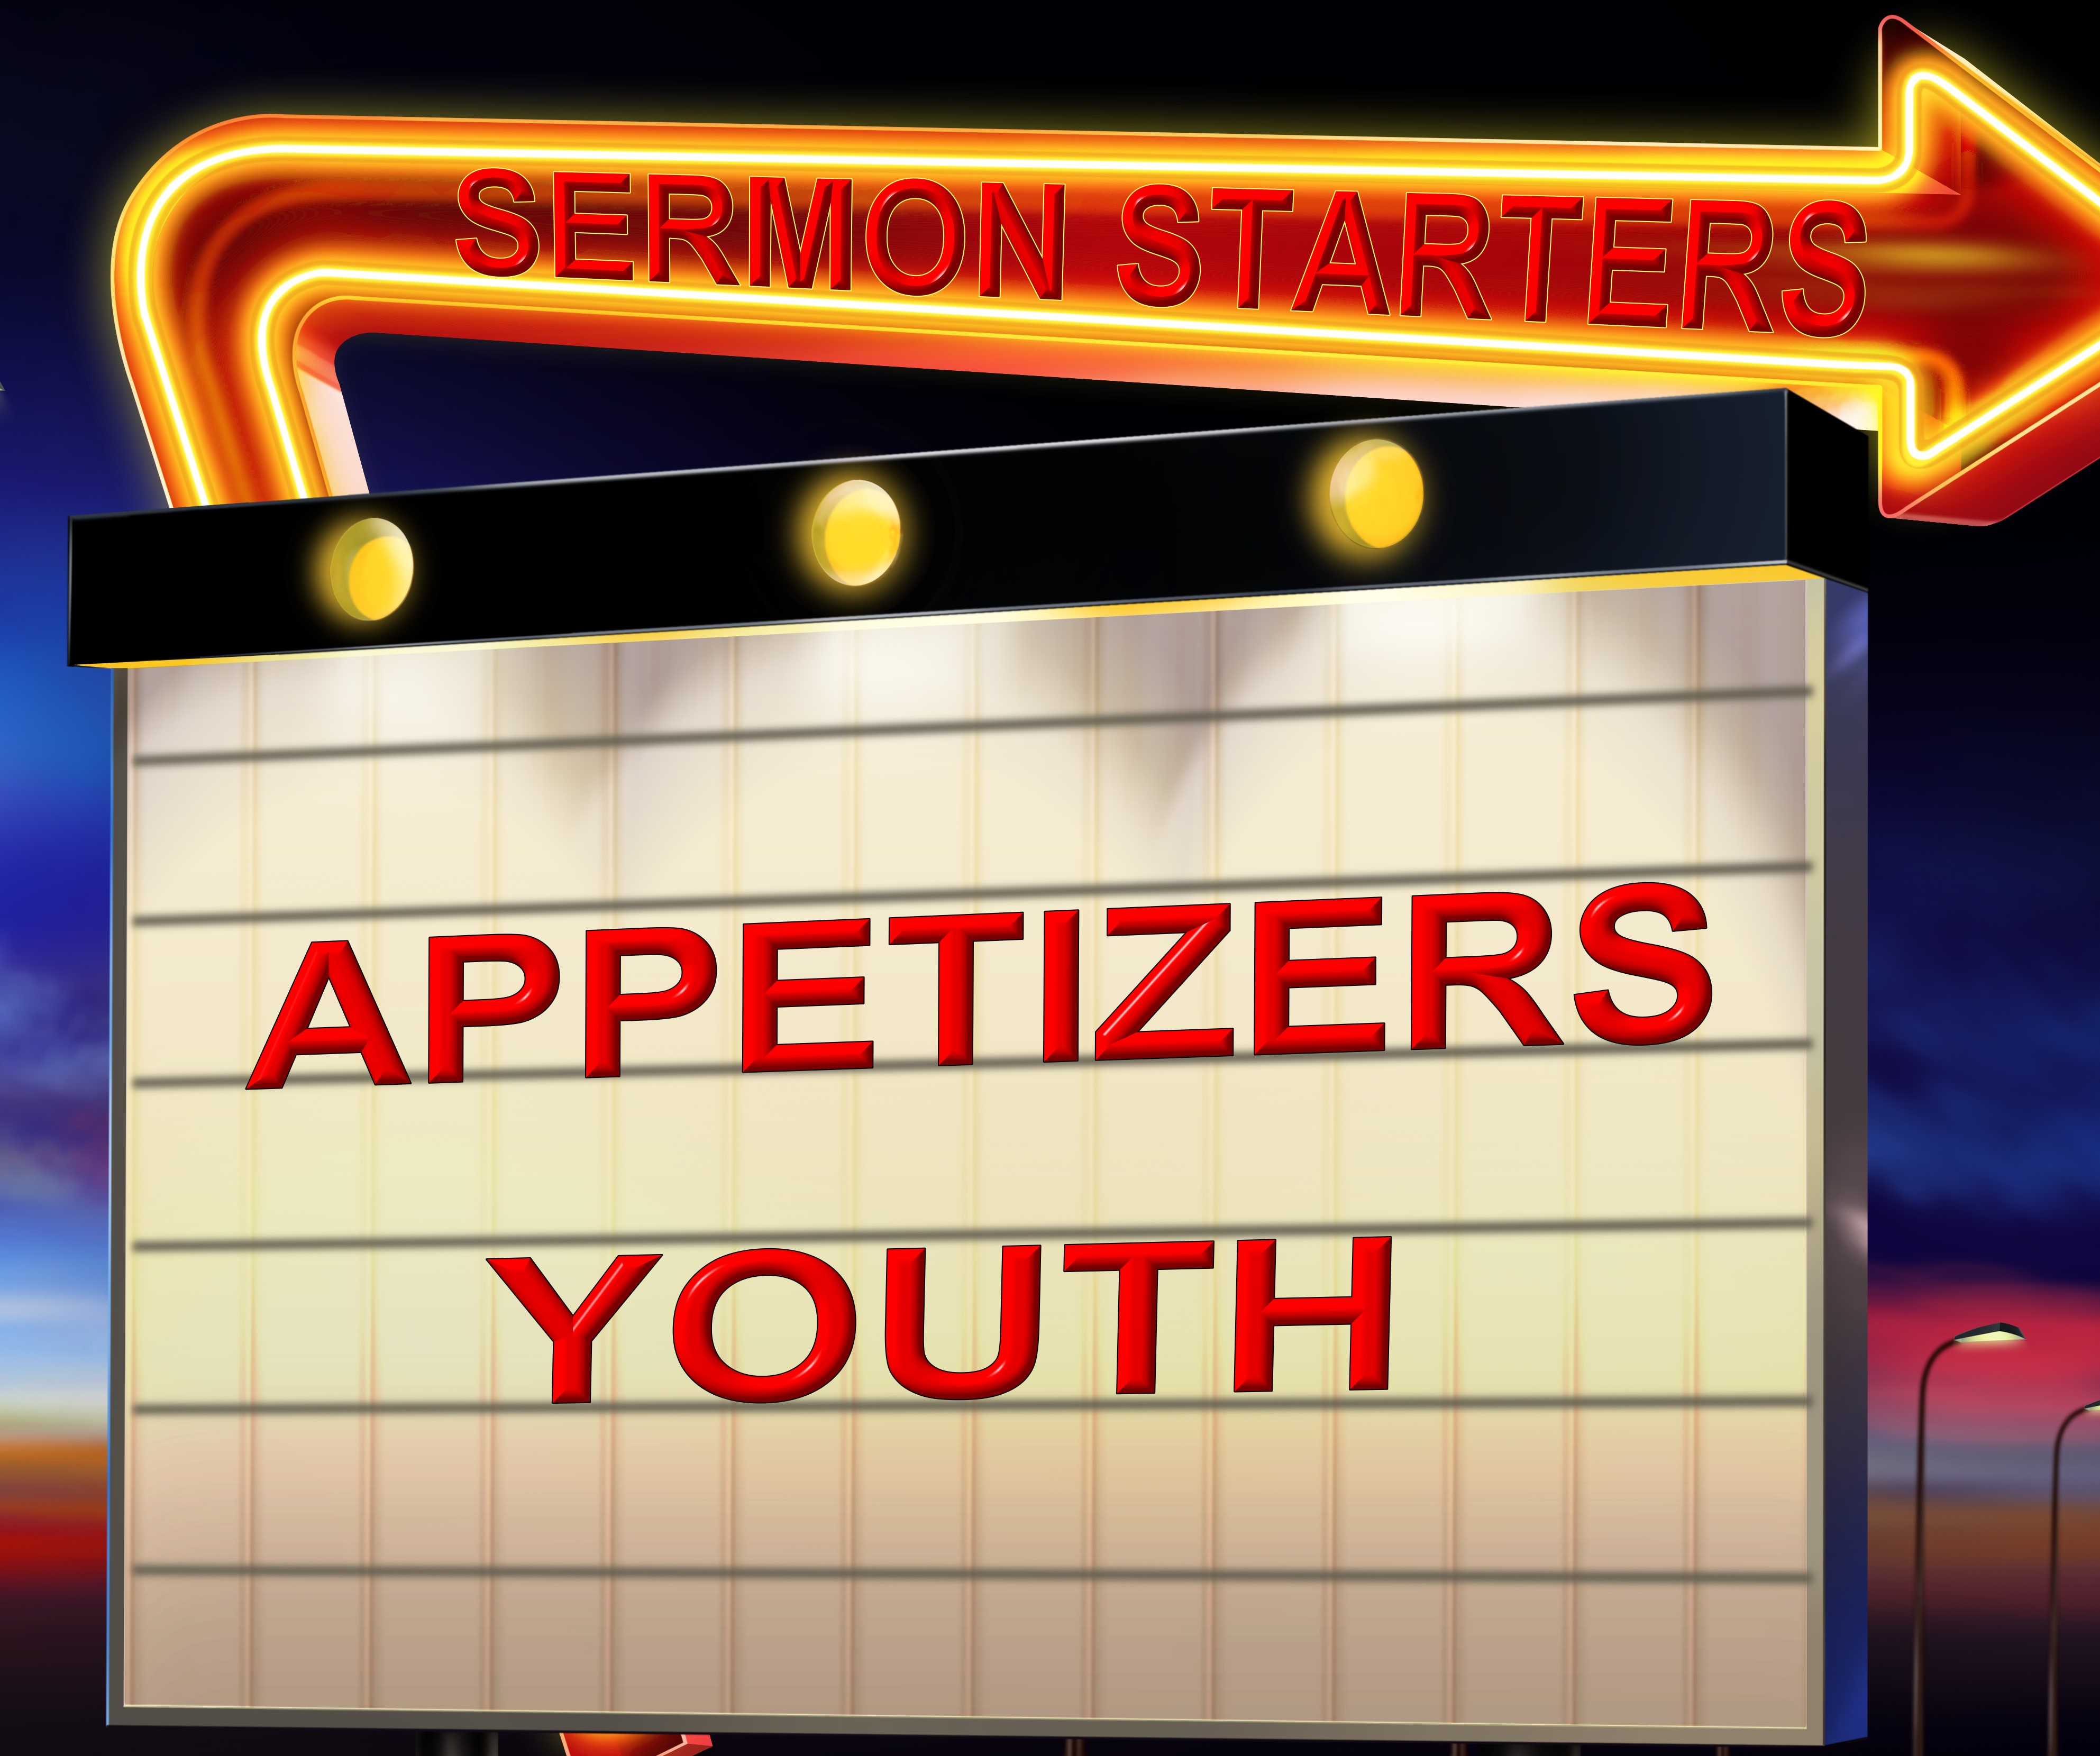 Appetizers Youth